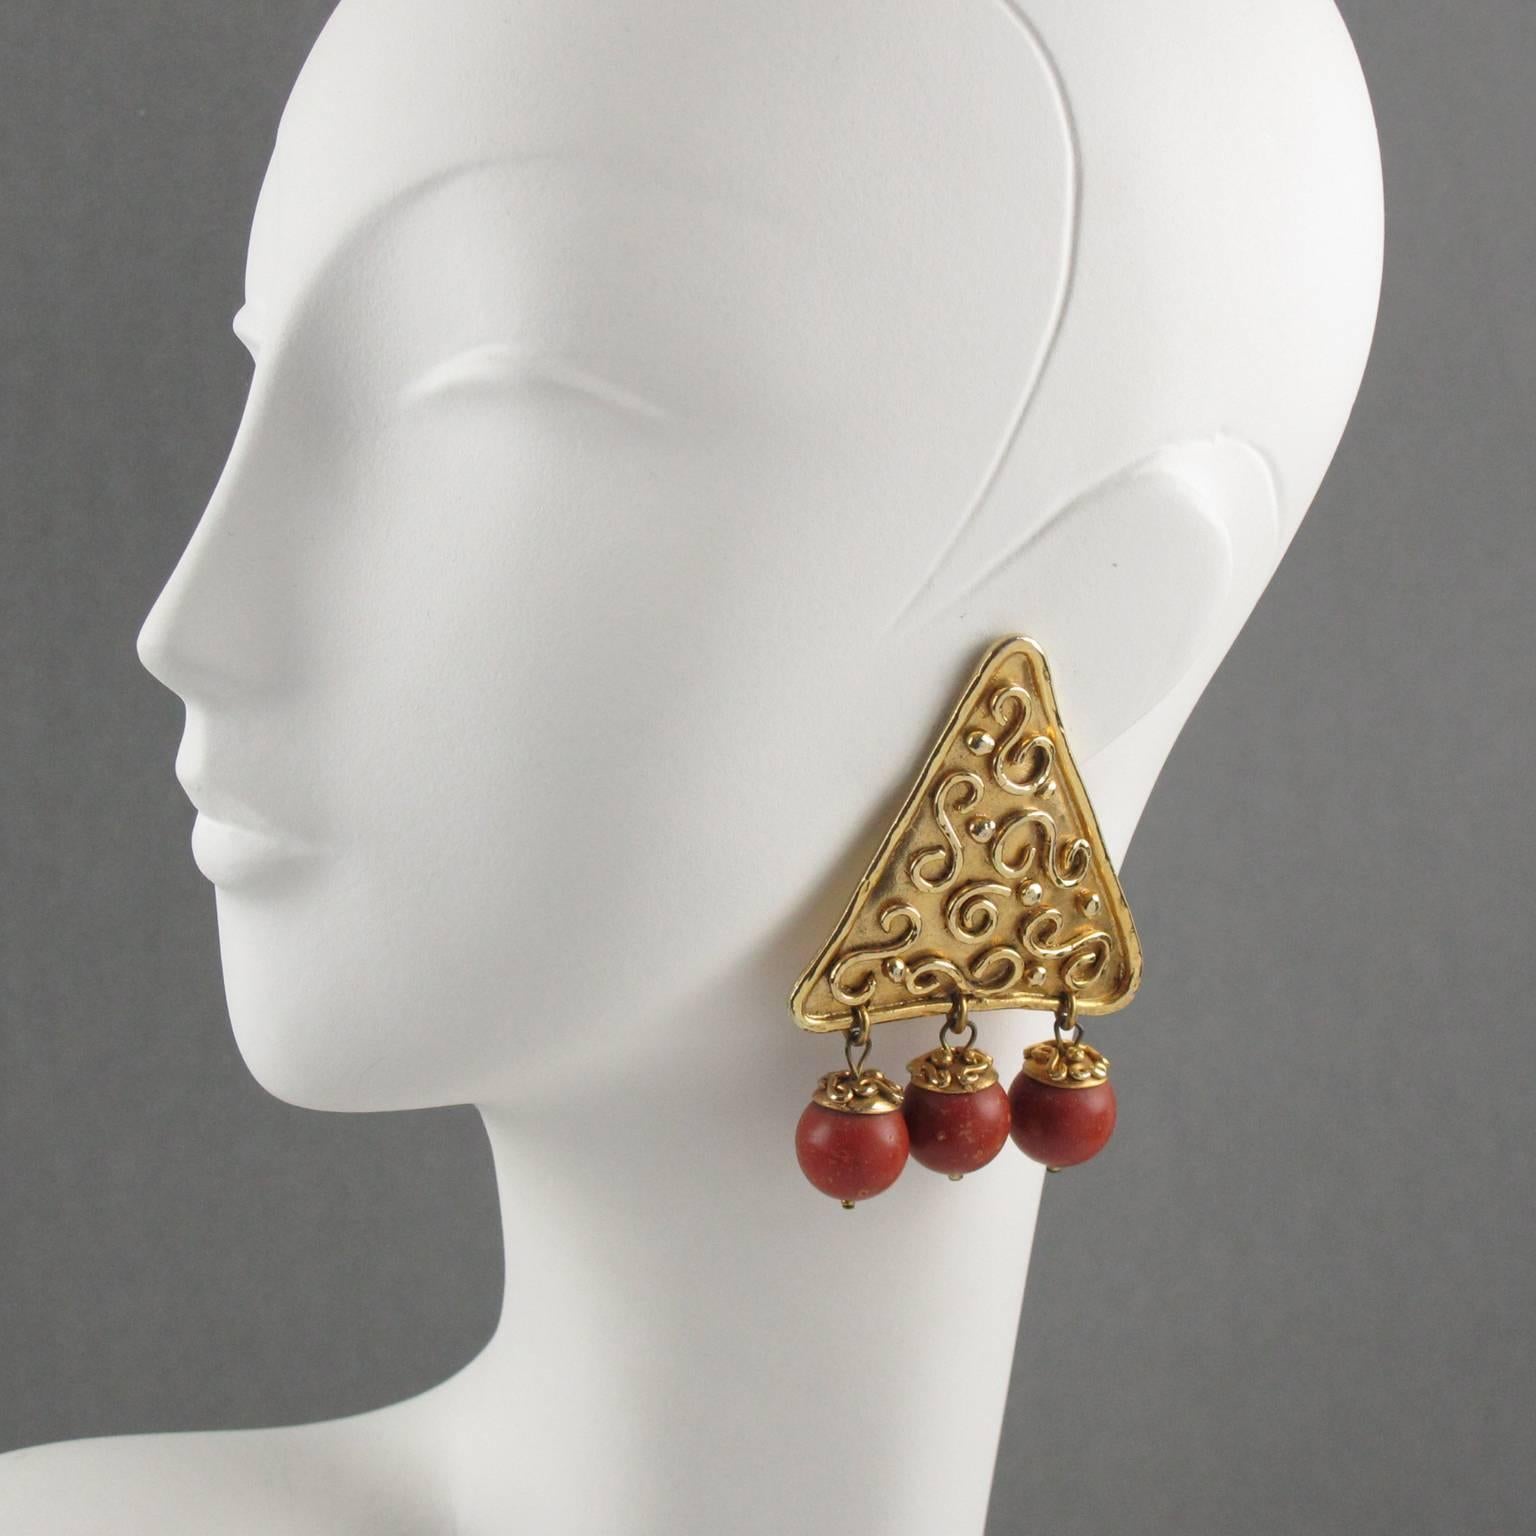 Stunning French designer Edouard Rambaud Paris signed clip on earrings. Oversized Byzantine inspired design with shinny gilded metal large triangle shape all textured and ornate, compliment with dangling resin beads imitating wood. Signed underside